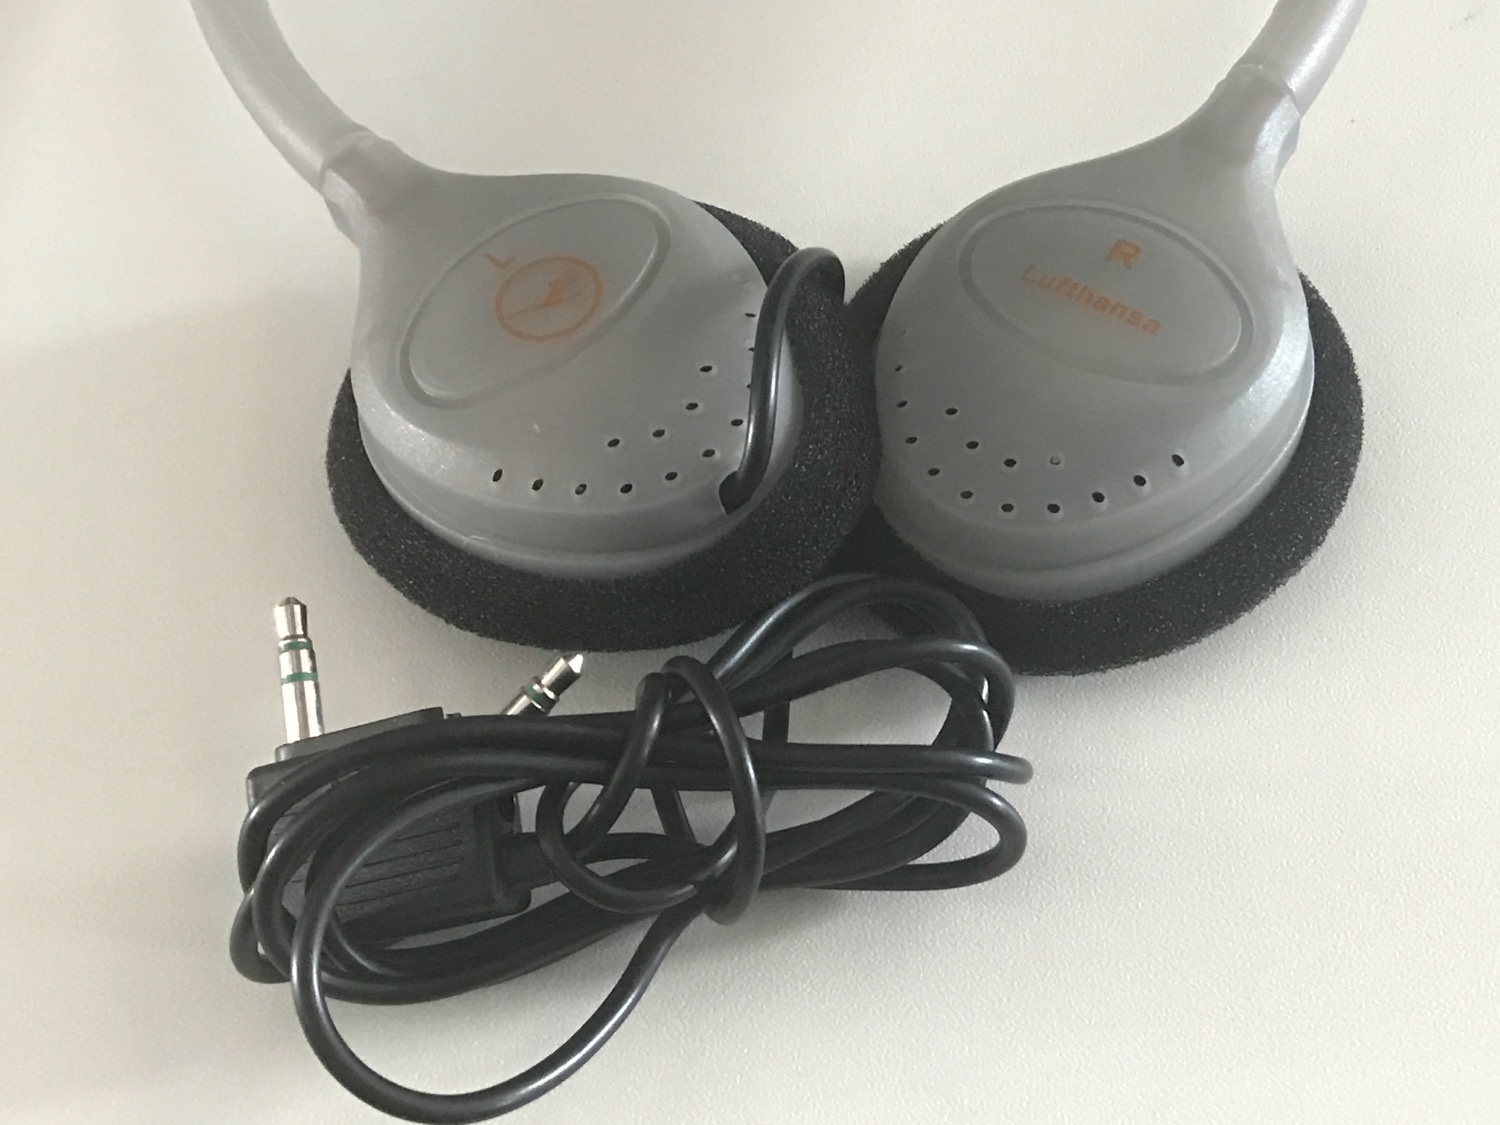 a pair of headphones with a cord